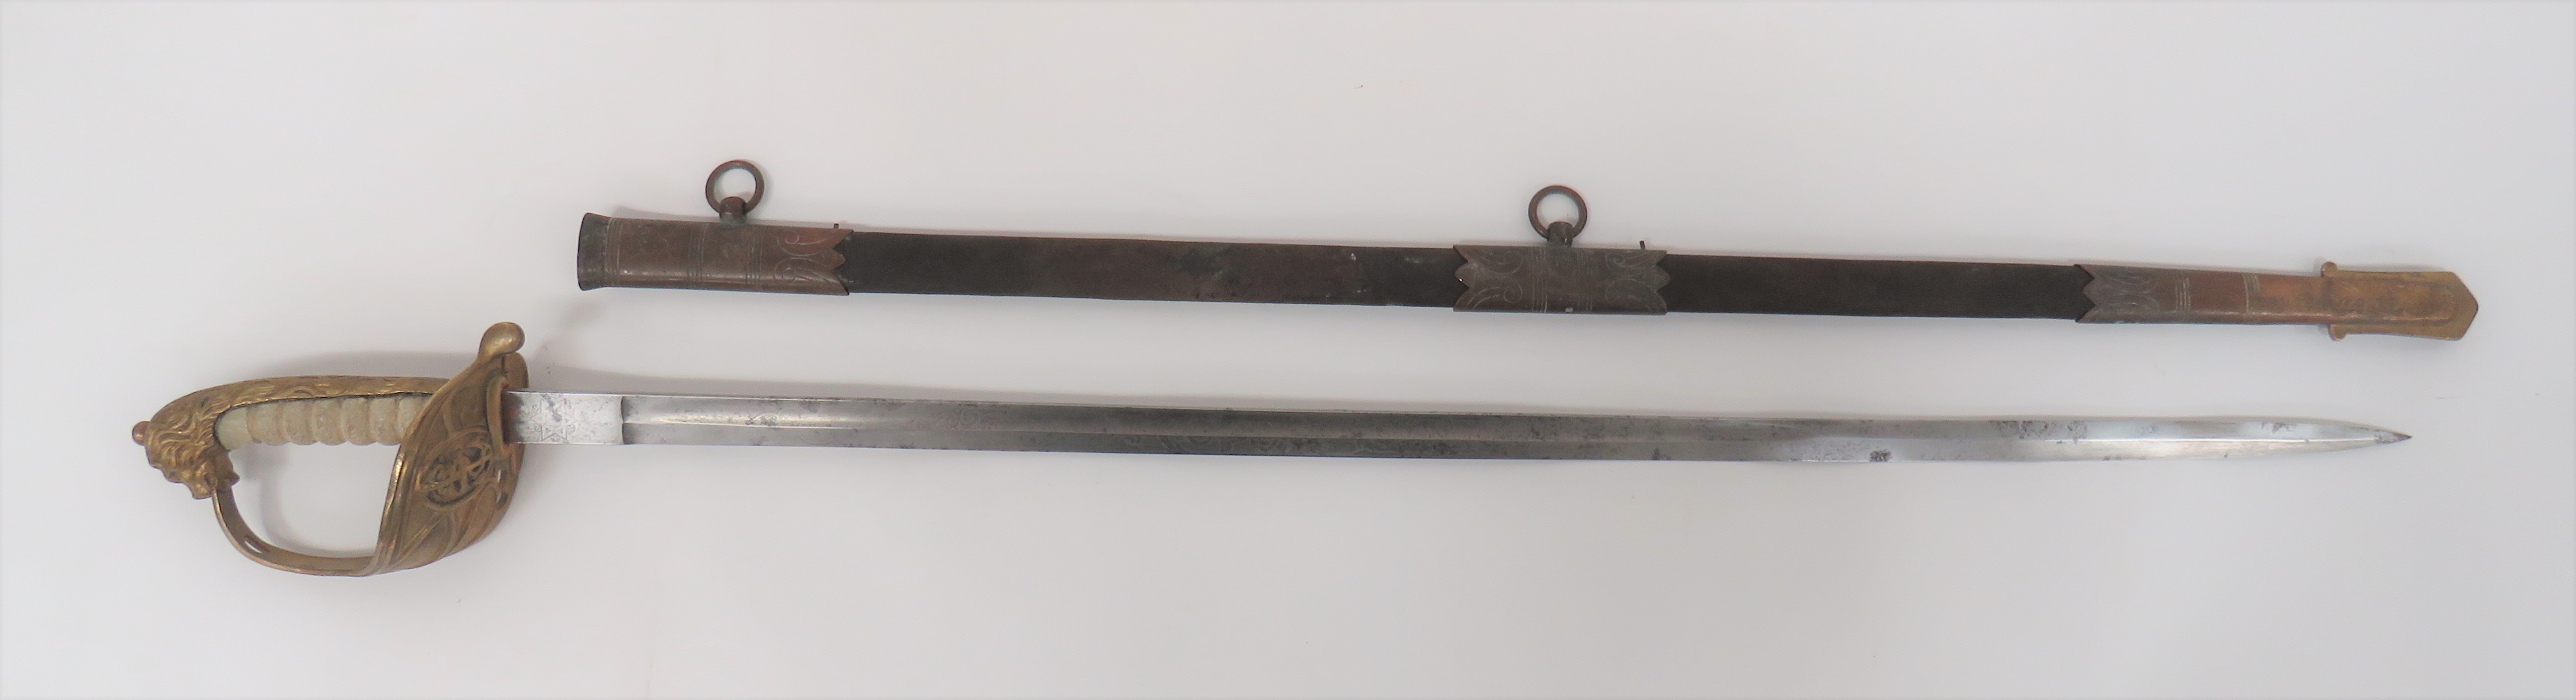 Post 1901 Royal Navy Officer's Sword 31 3/4 inch, single edged blade with wide fuller.  Etched